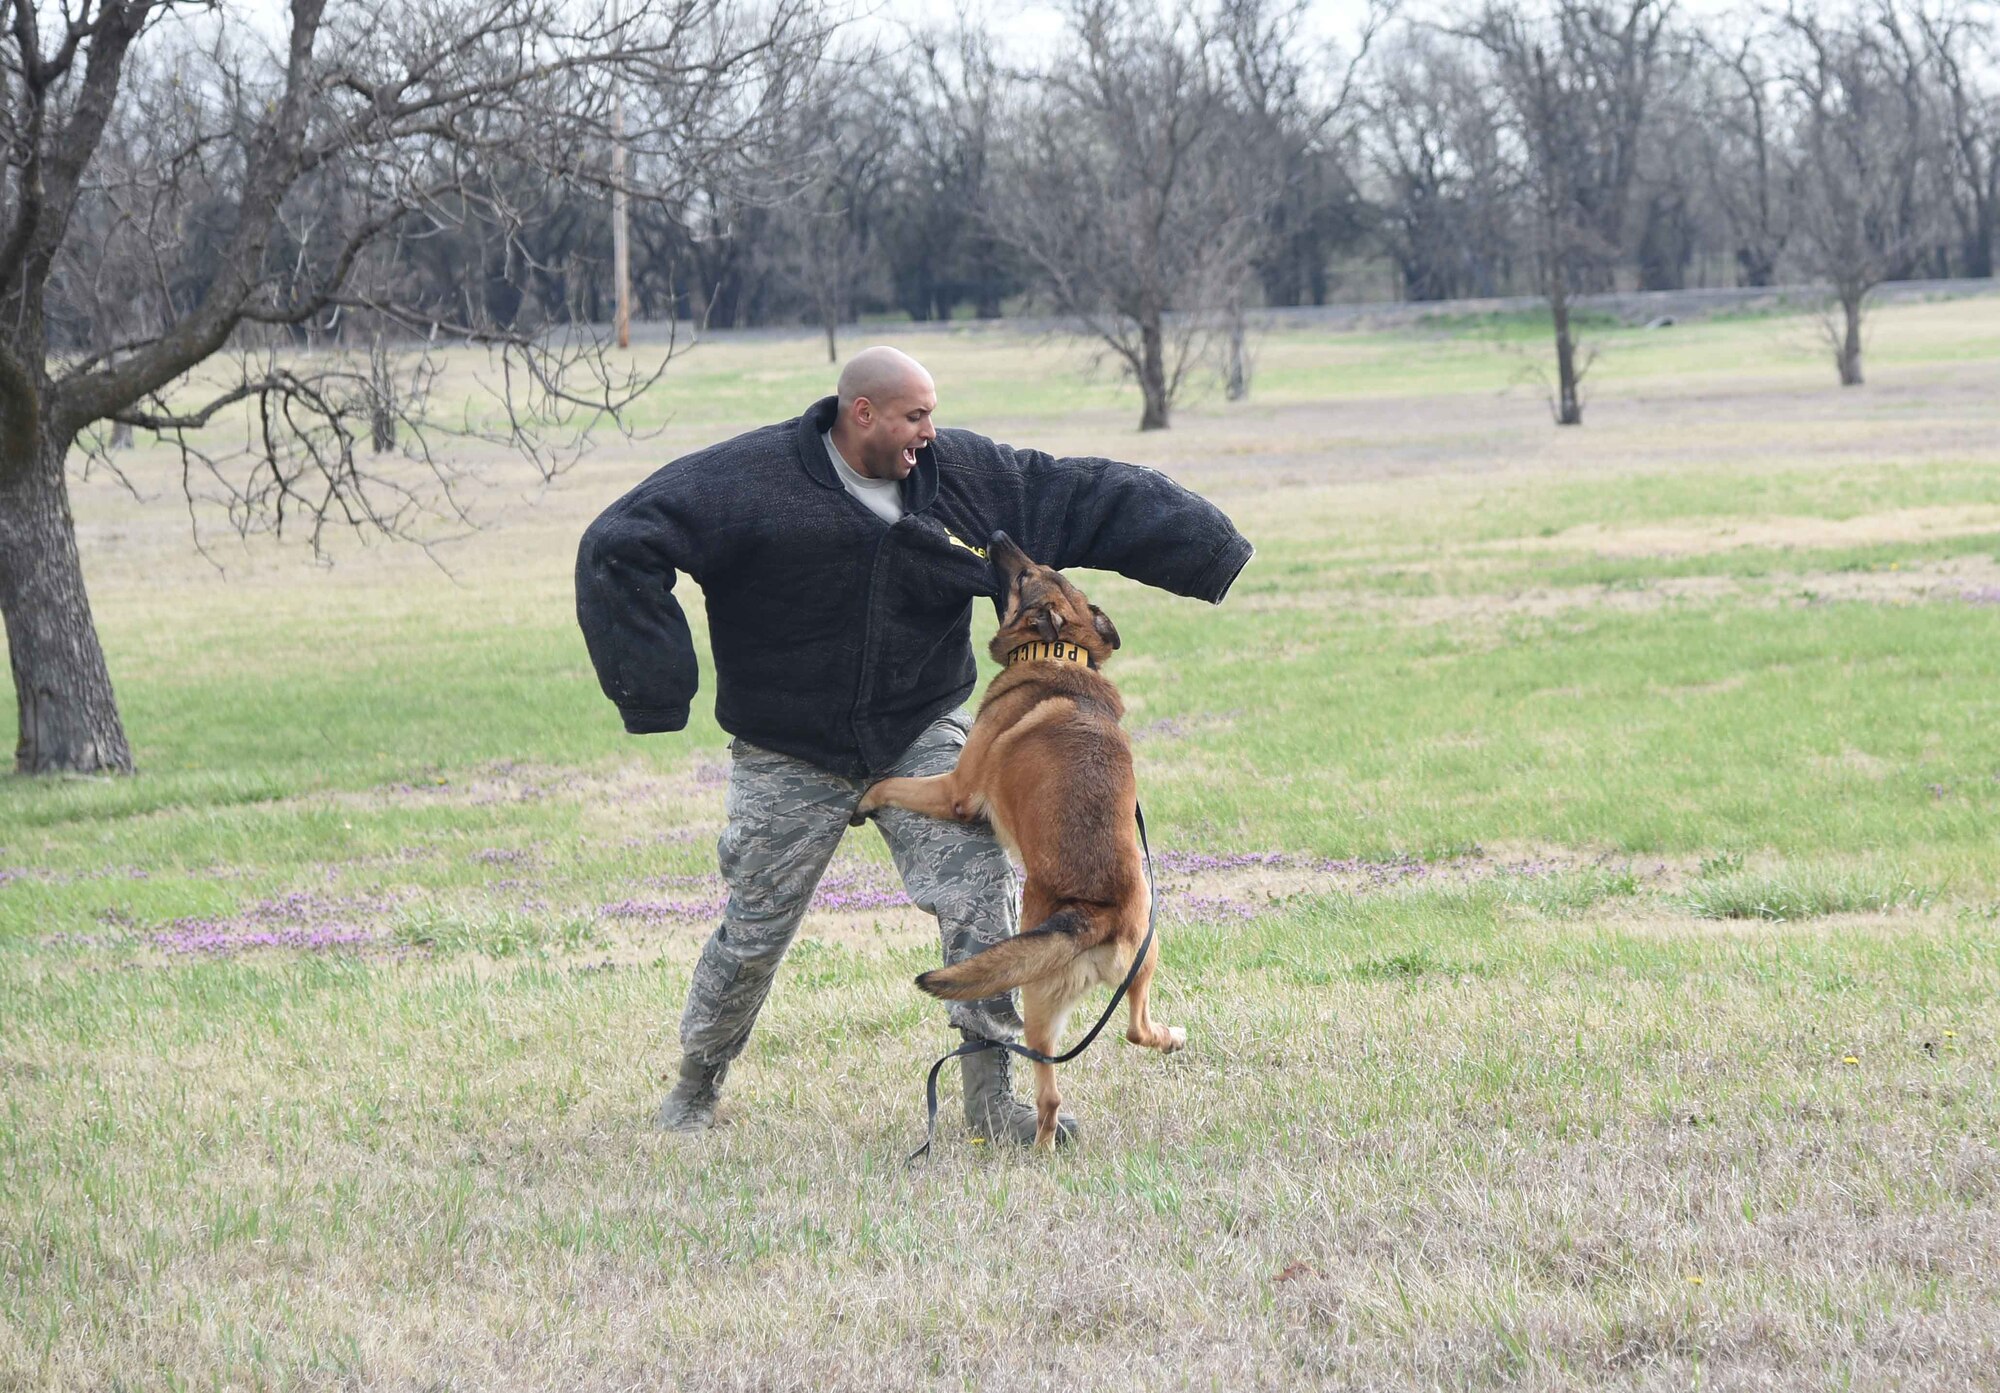 Staff Sgt. Elvin Jose, 22nd Security Forces Squadron military working dog handler, is bitten by Iras, an MWD, during a training session March 23, 2017, at McConnell Air Force Base, Kan. The handlers work regularly with the base’s eight dogs on different types of training. (U.S. Air Force photo/Airman 1st Class Erin McClellan)